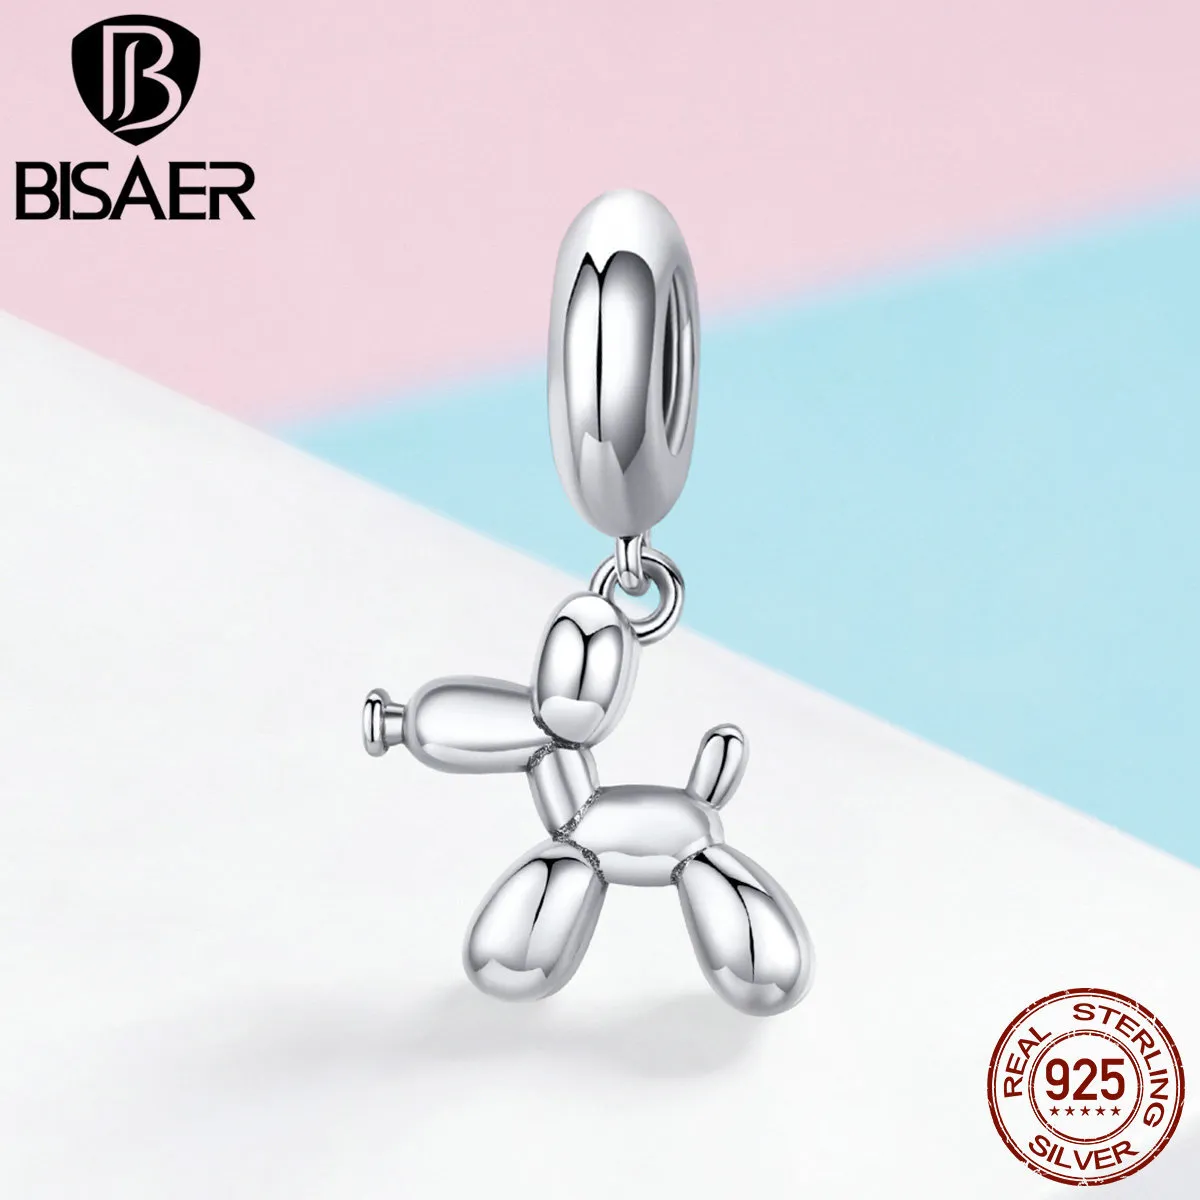 Bisaer 925 Sterling Silver Balloon Dog Tools Charms Puppet Dog Beads Fit Bracet Beads for Silver 925 Jewelry Making ECC981 Q0225212L